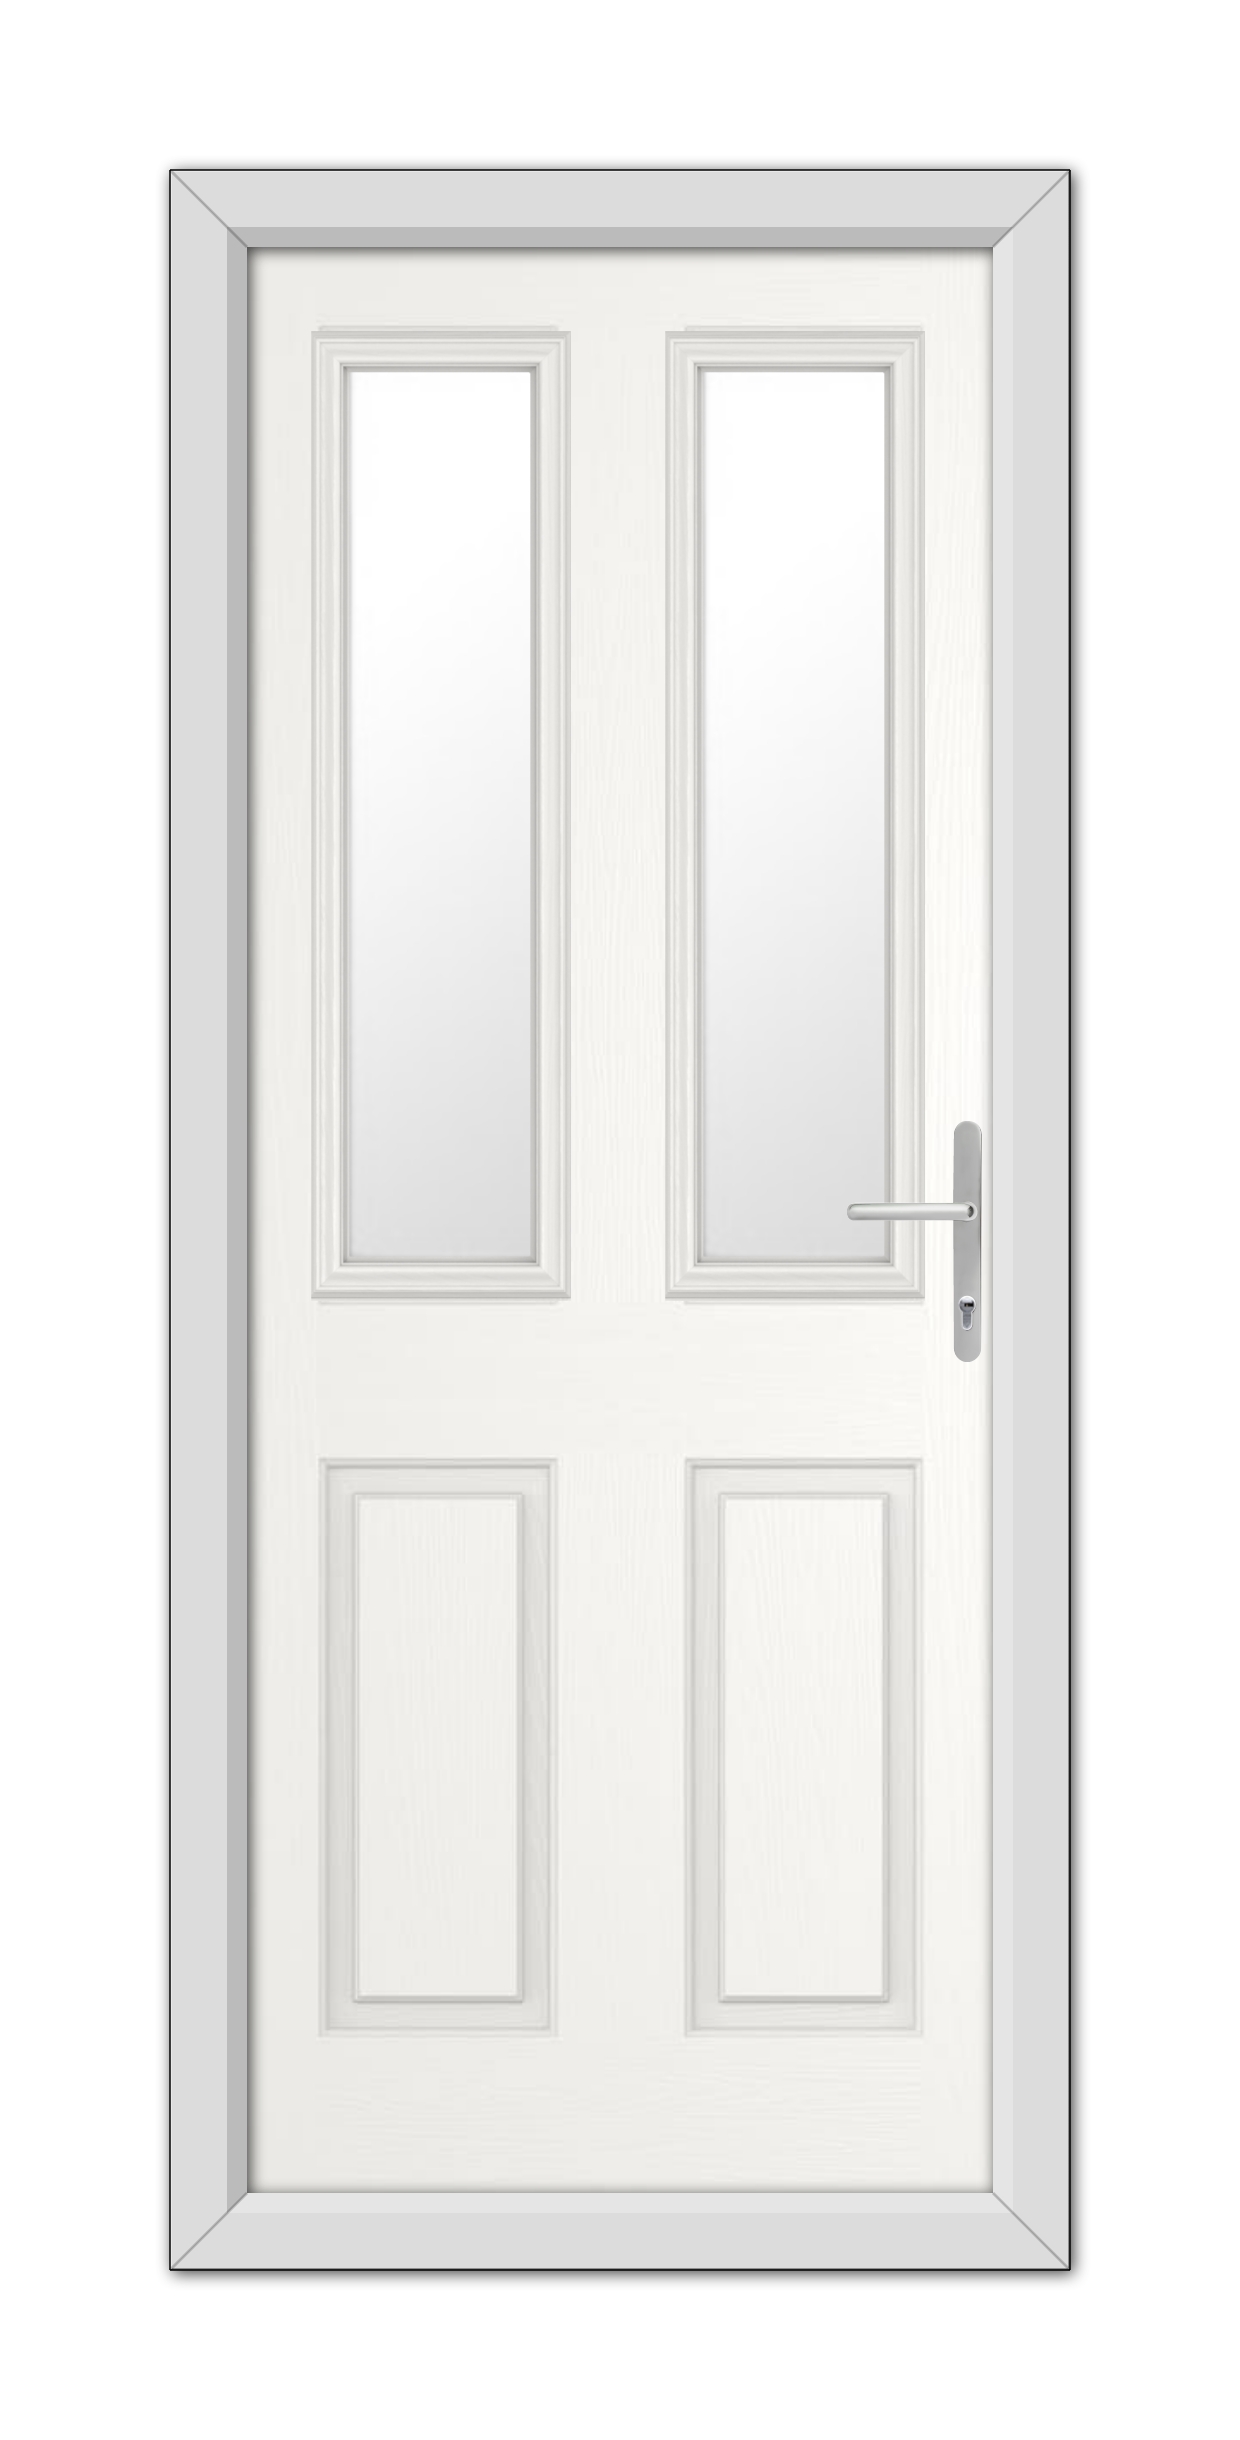 White Whitmore Composite Door 48mm Timber Core double door with rectangular panels and a silver handle, set within a simple frame, isolated on a white background.